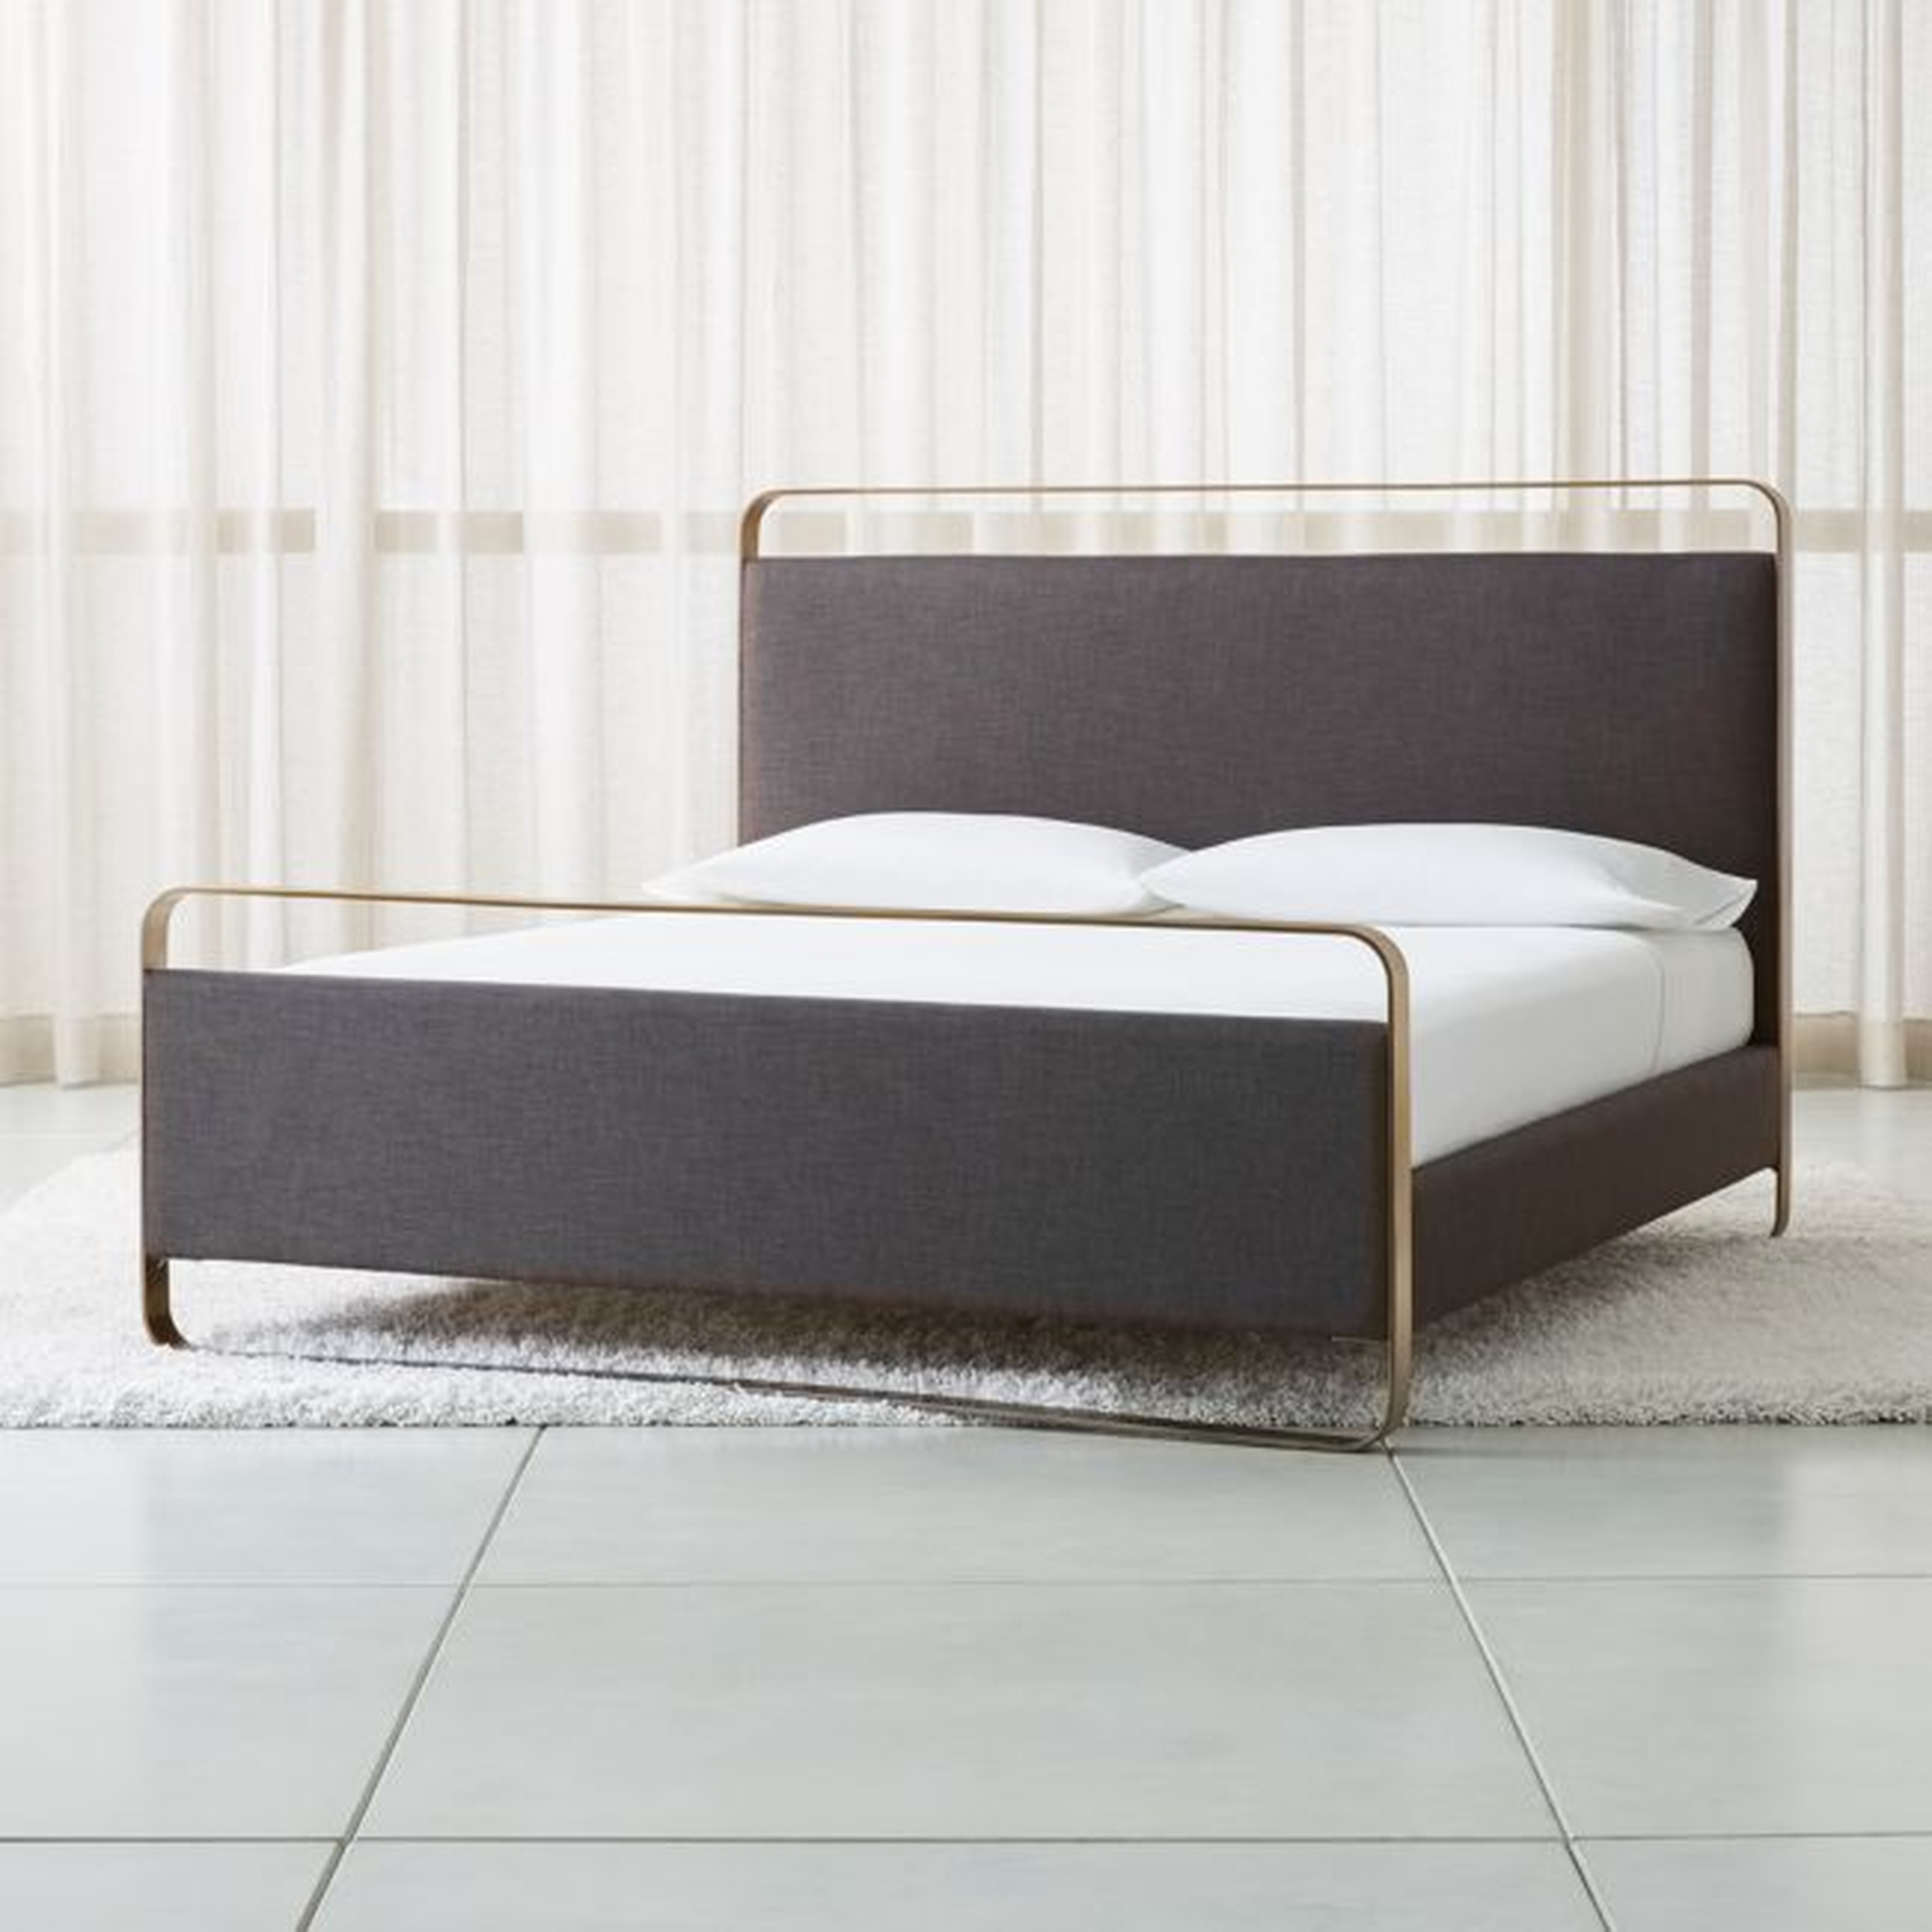 Gwen King Metal and Upholstered Bed - Crate and Barrel